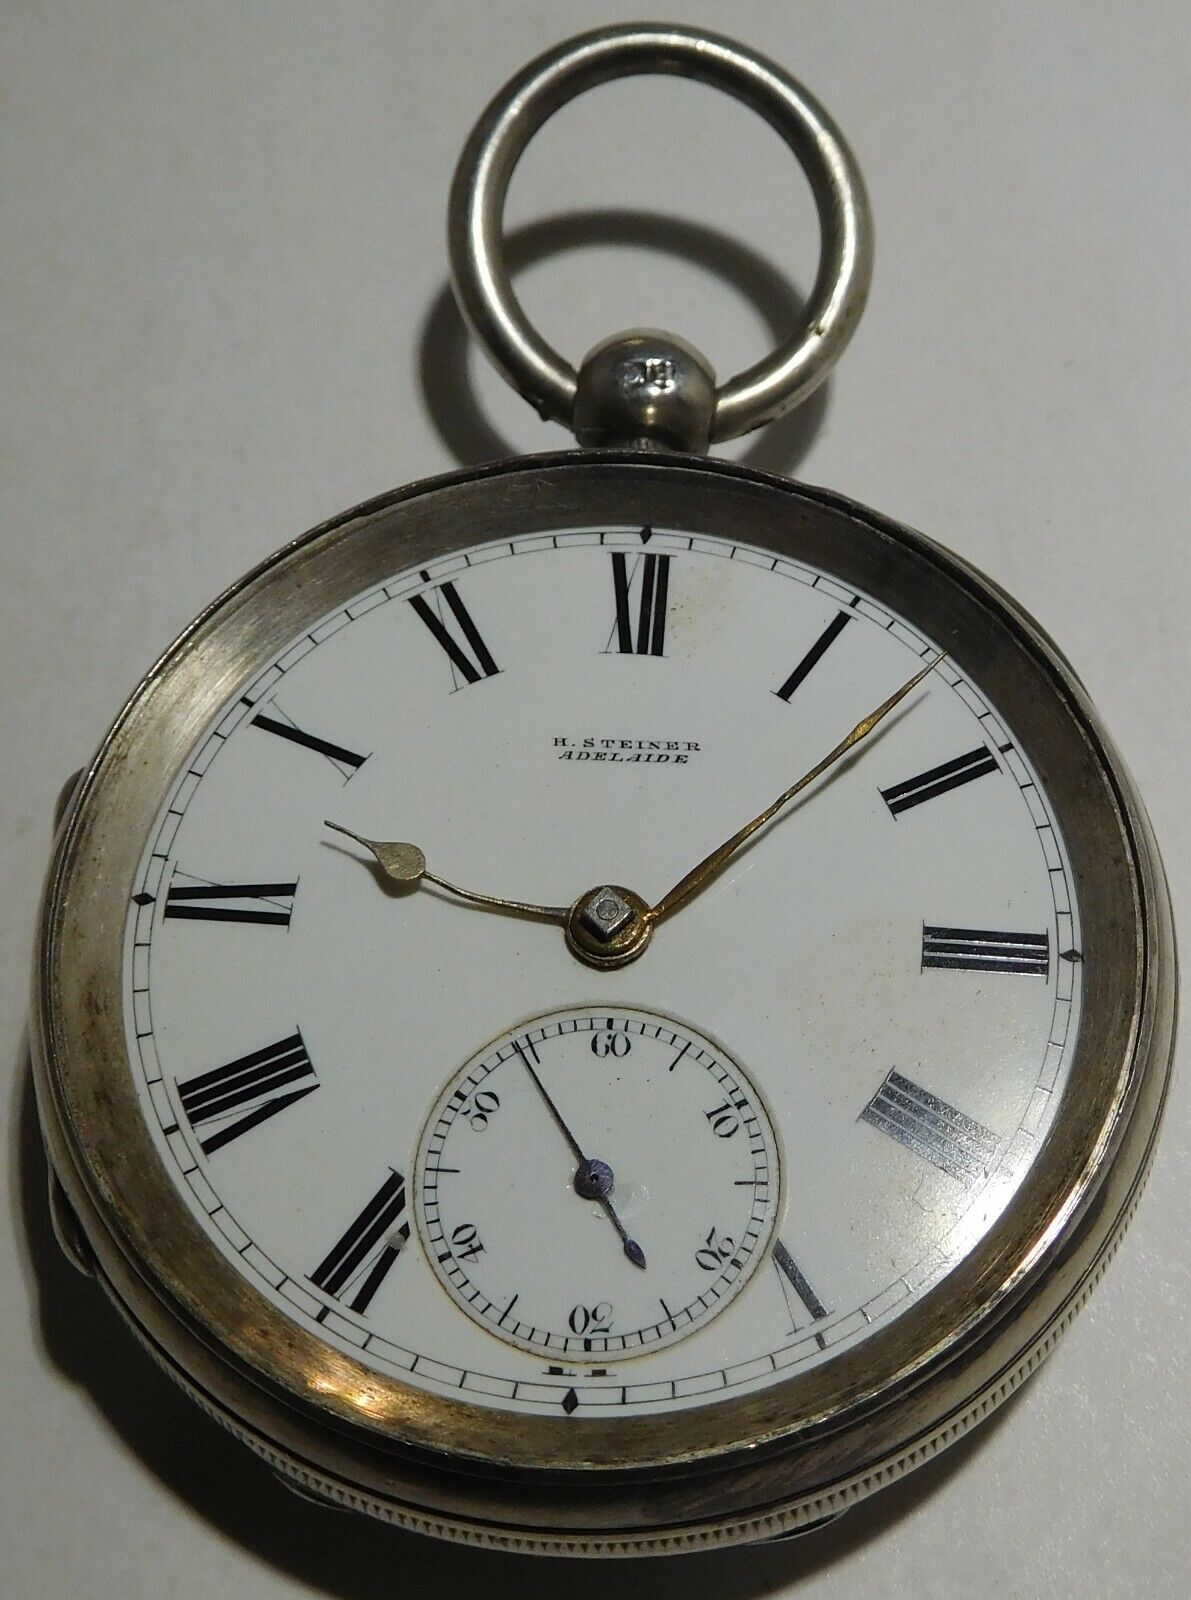 Antique sterling silver open face pocket watch c 1883 Henry Steiner Adelaide